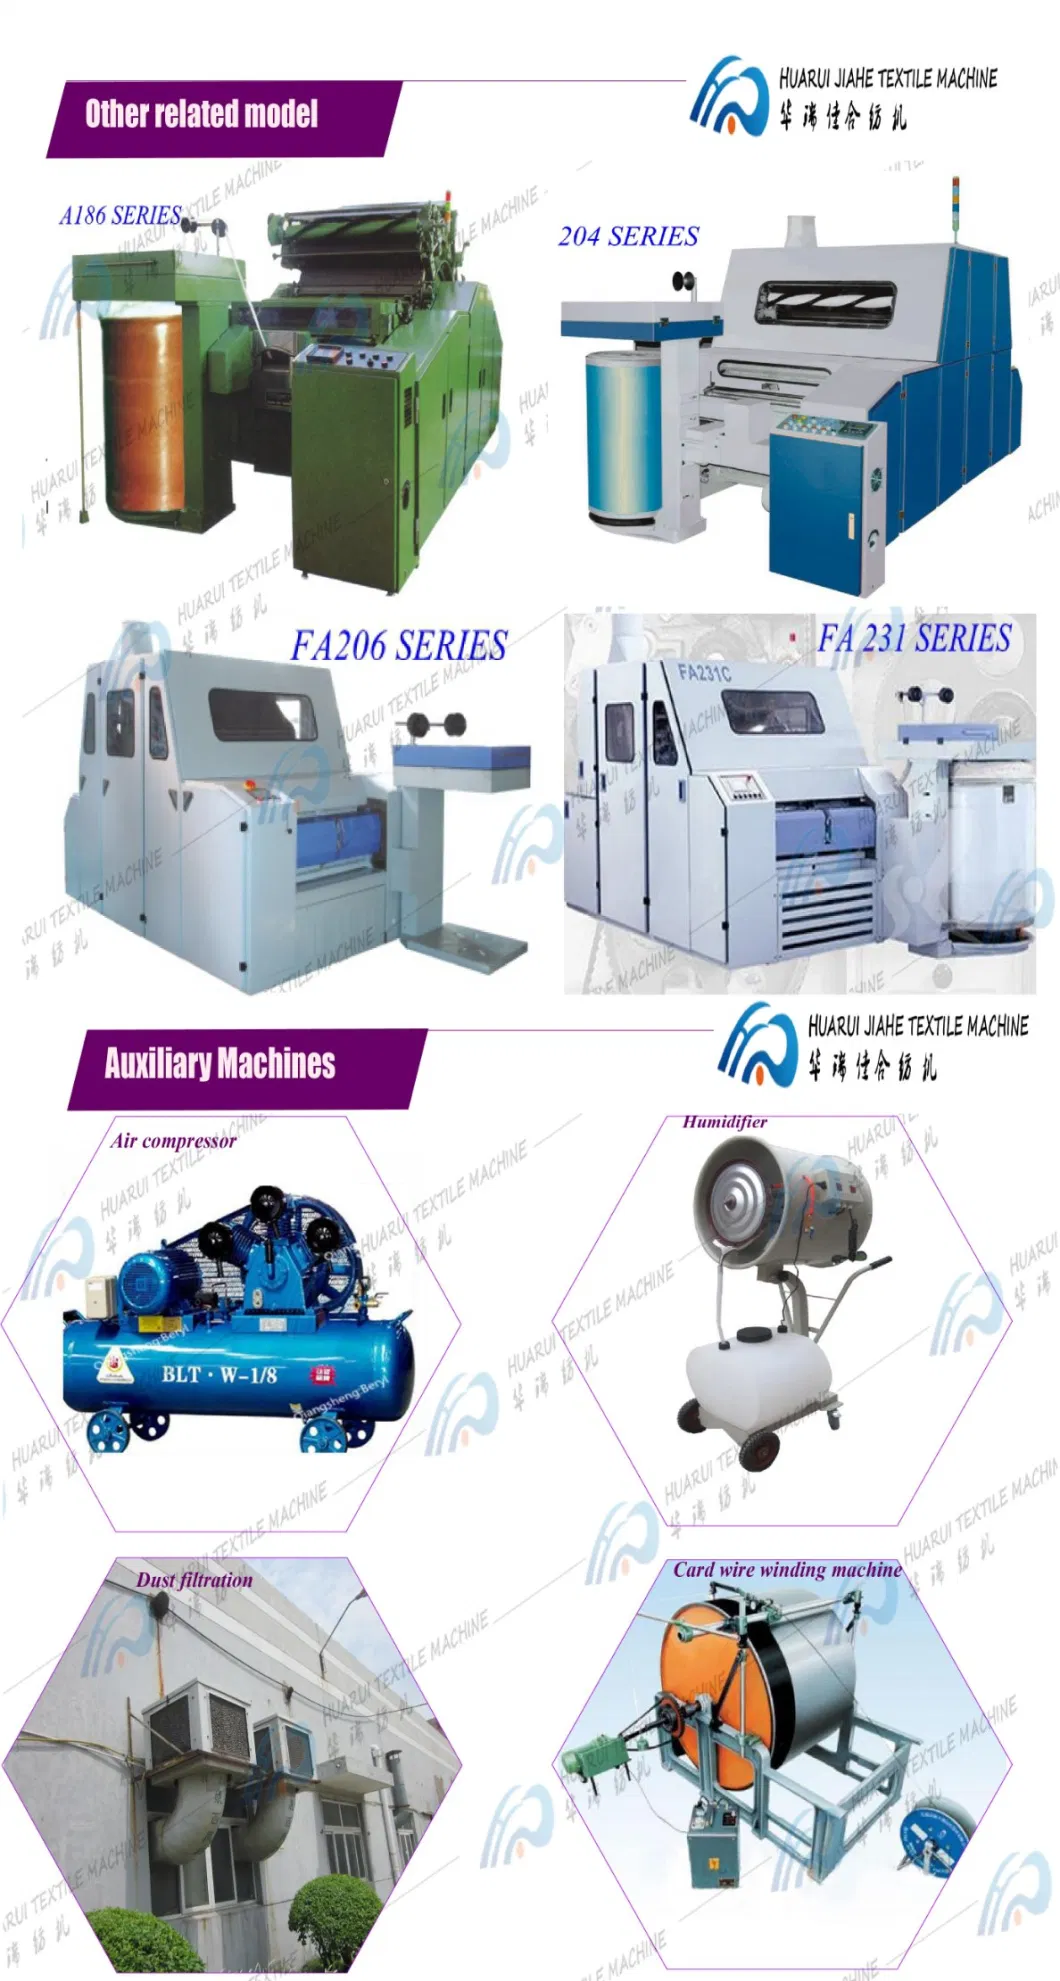 High Pressure Jigger Dyeing Machine Meet The Requirement of Small Batches and Different Kinds Fabric, Dyeing Machinery Equipment Used Refurbishment